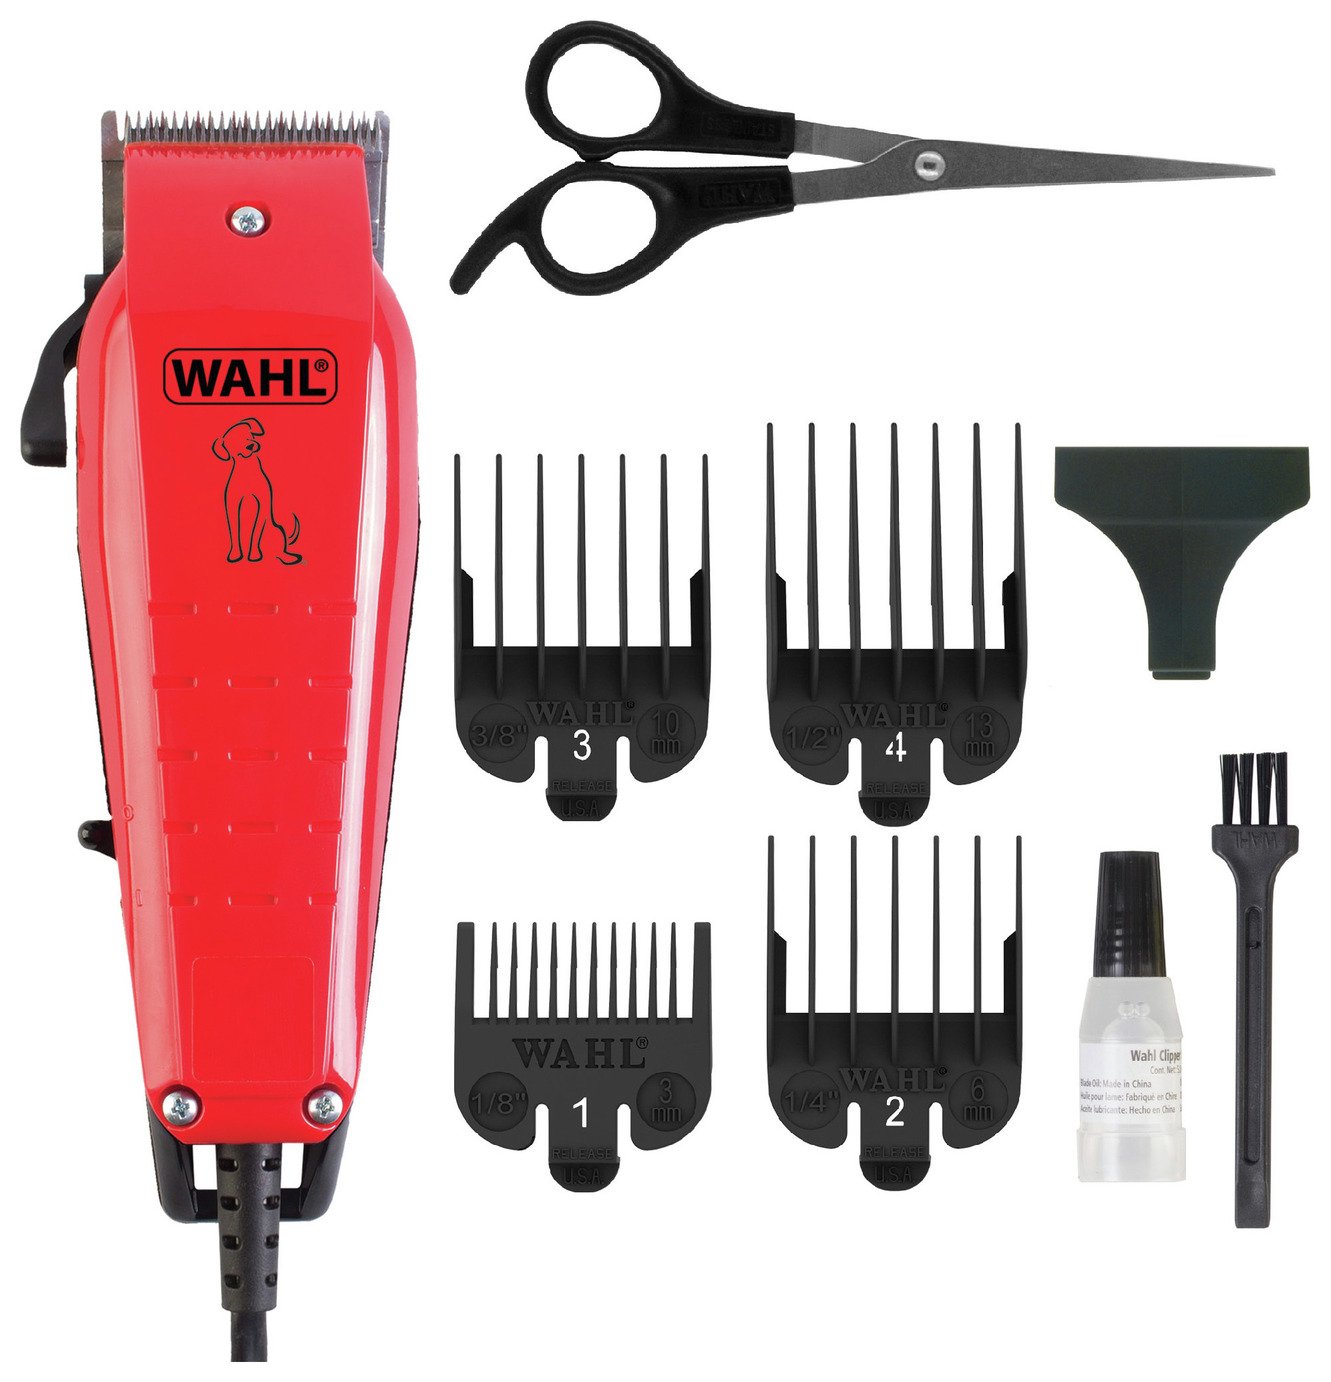 dog grooming clipper set